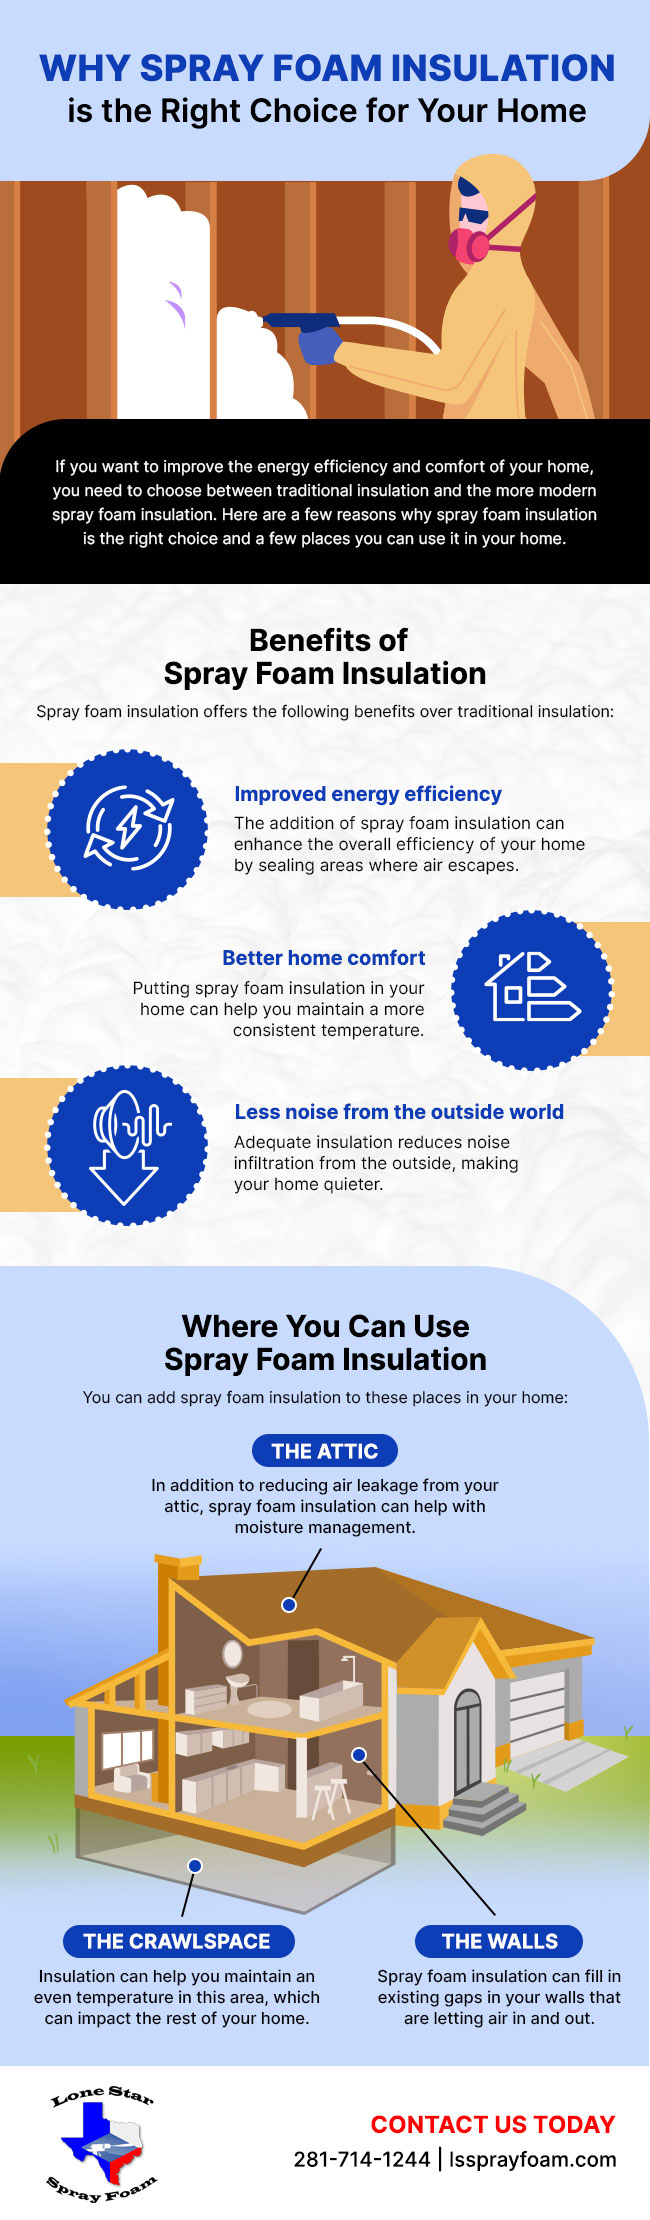 Why Spray Foam Insulation is the Right Choice for Your Home